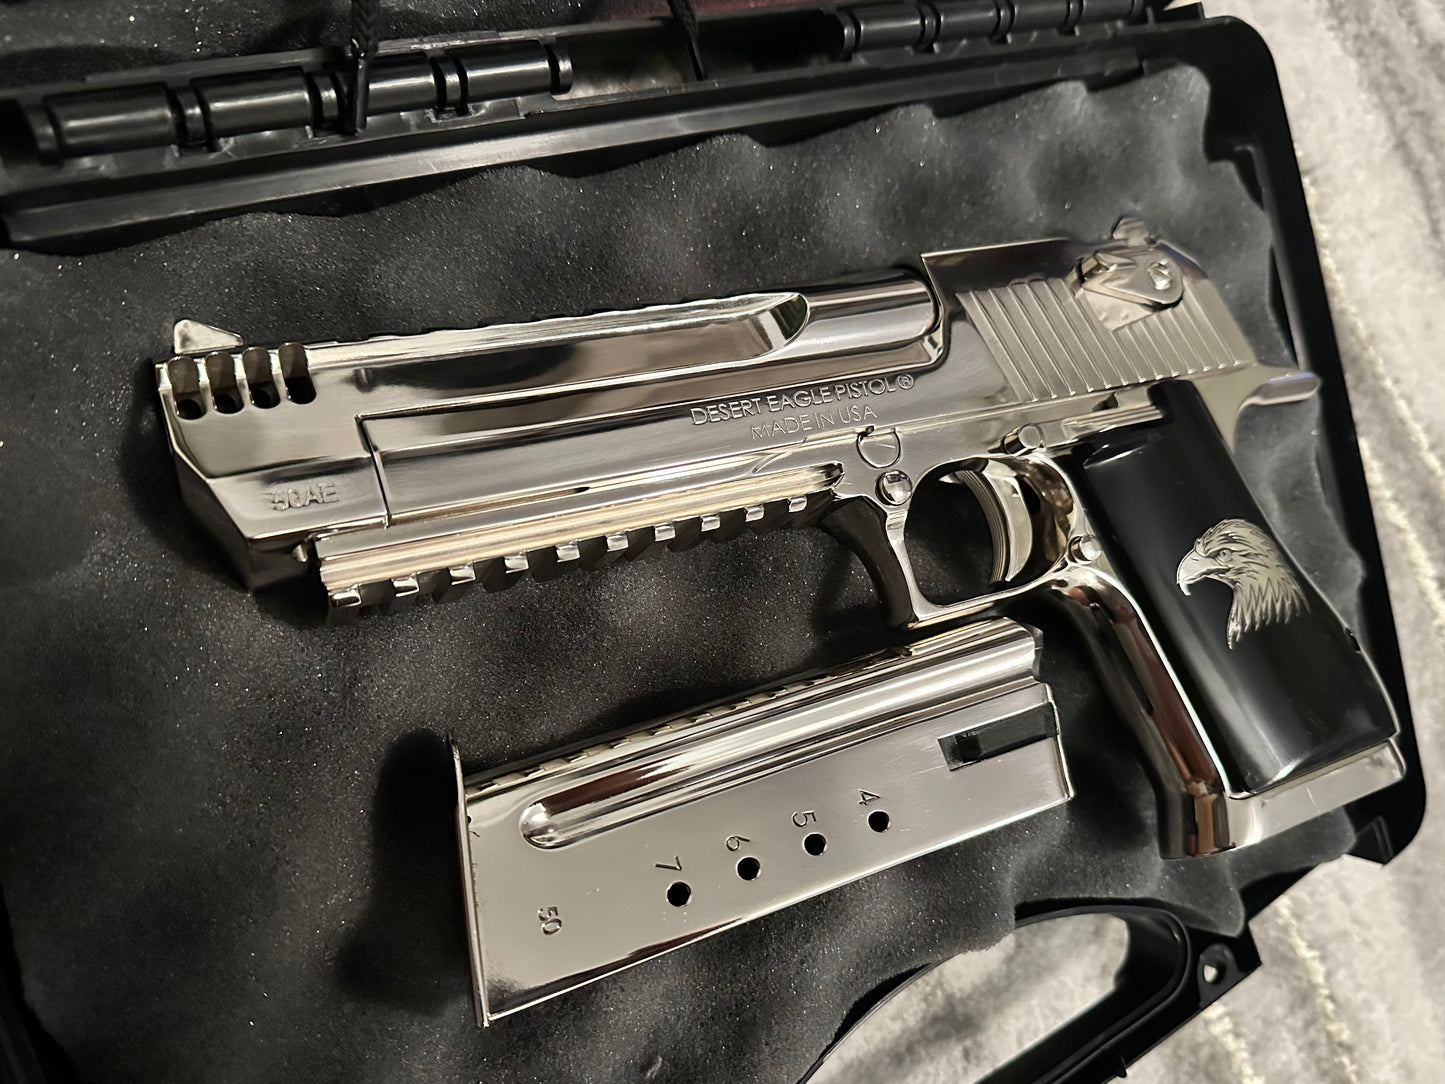 MAGNUM RESEARCH DESERT EAGLE 50AE HIGH POLISHED MIRROR FINISH